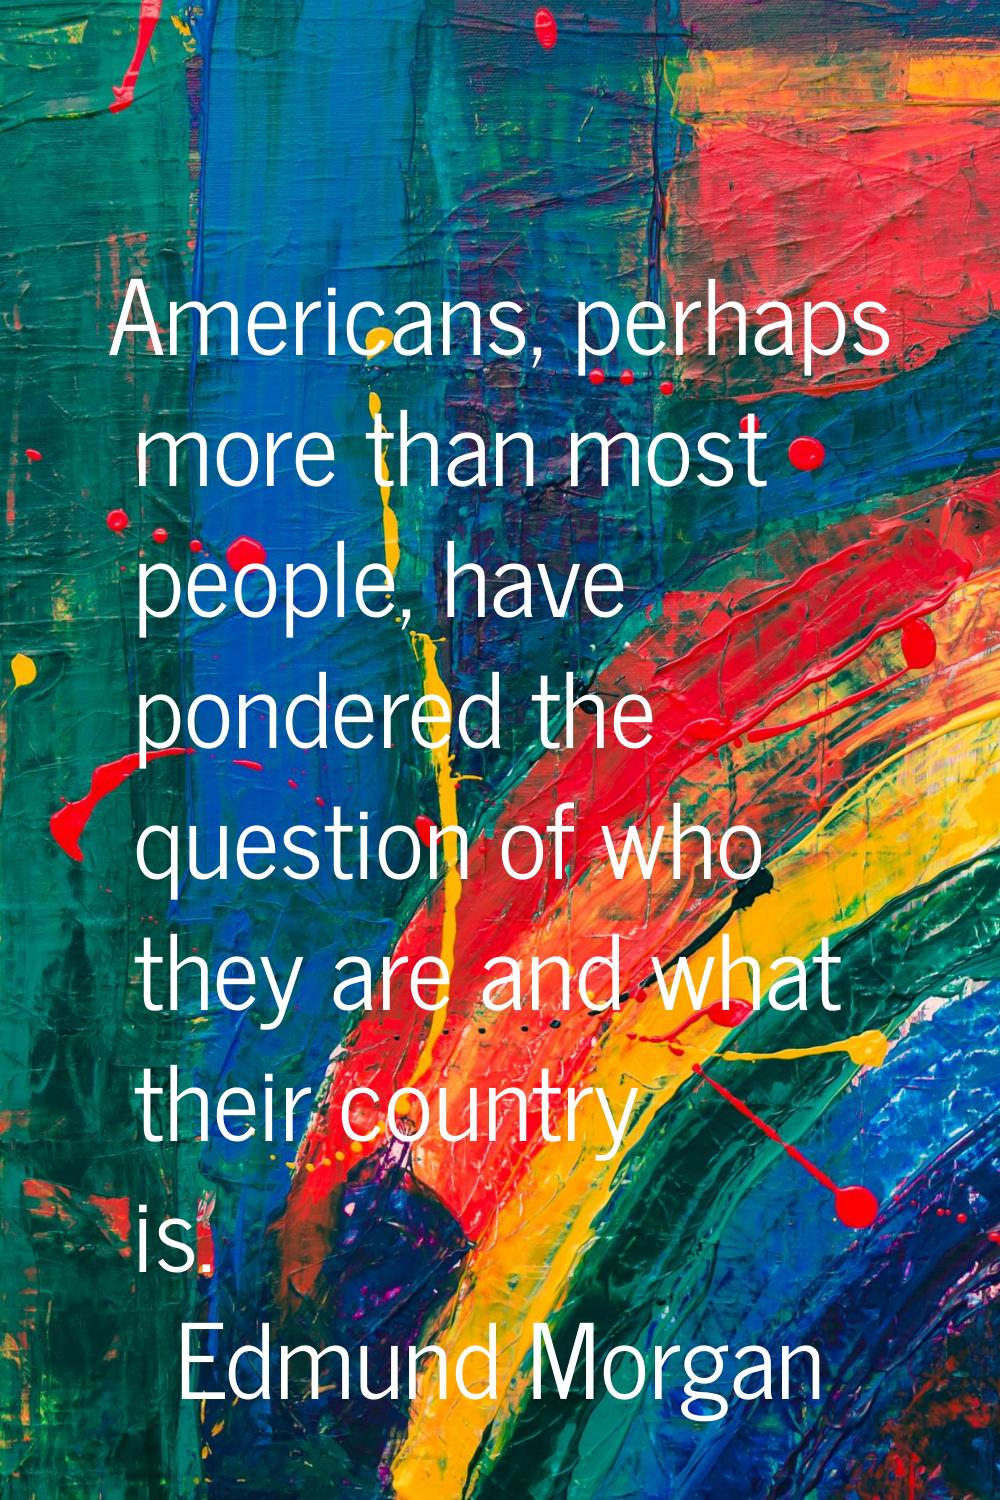 Americans, perhaps more than most people, have pondered the question of who they are and what their